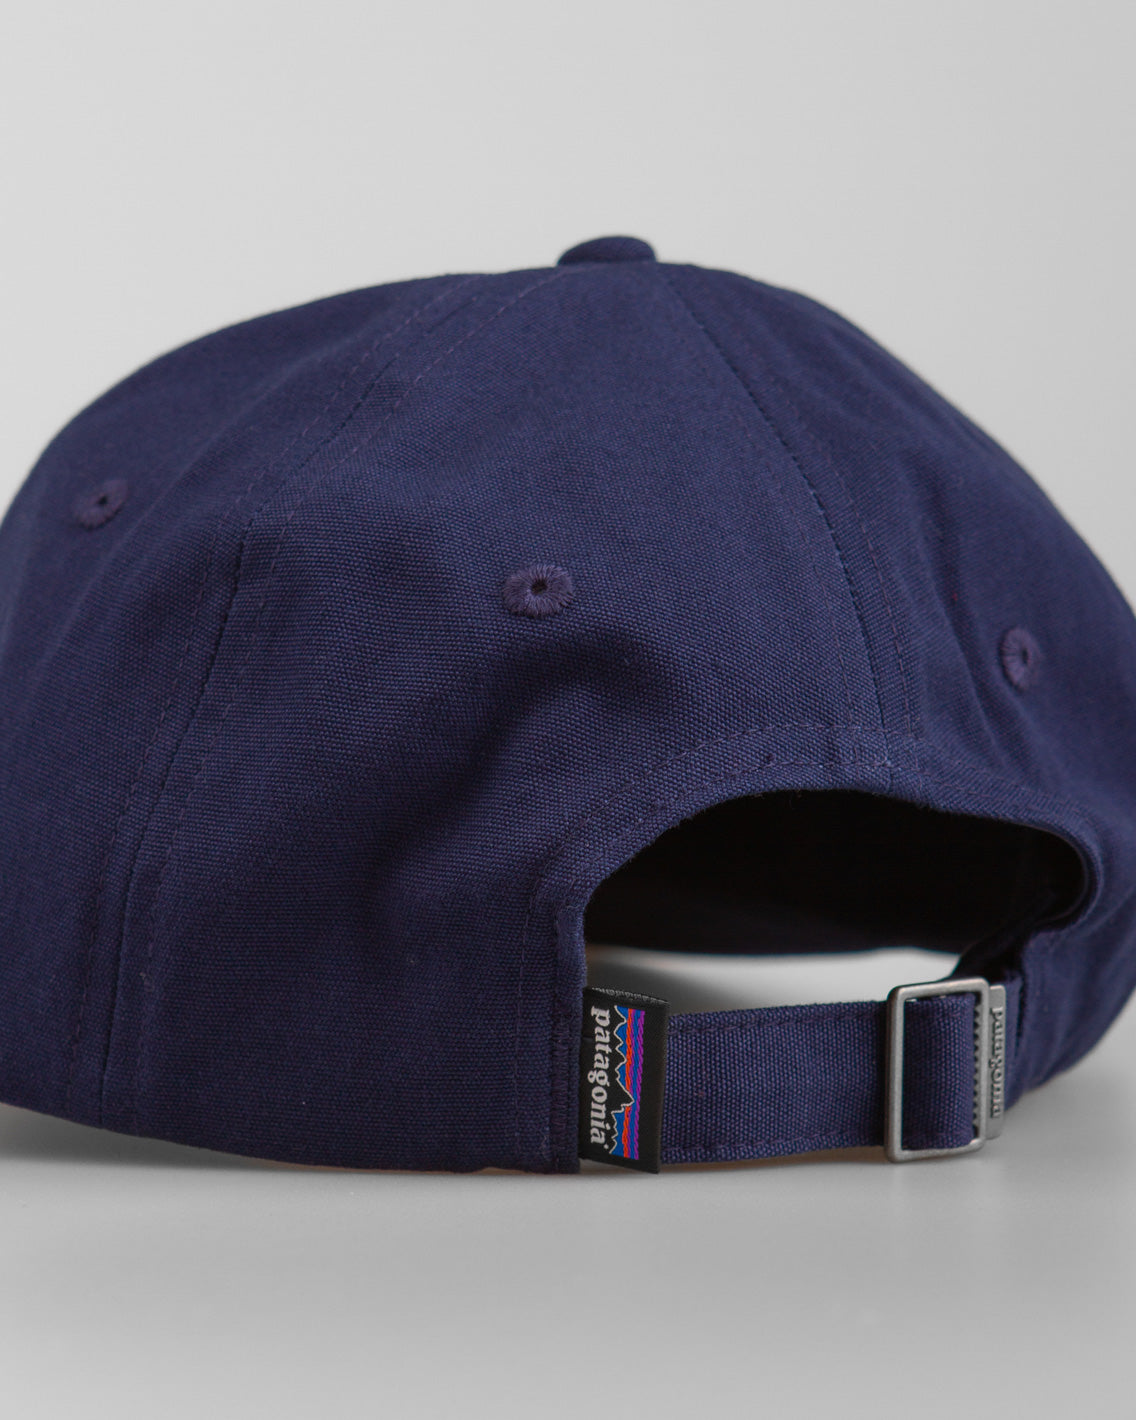 Crafted from 100% organic cotton, the Patagonia P-6 Label Trad Cap in Classic navy is a comfortable and sleek 6-panel cap, complete with a curved brim and snapback closure. This Patagonia hat is perfect for chill days, or use it as a way to spruce up any streetwear outfit. Signed off with the iconic Patagonia P-6 Label on the centre front.